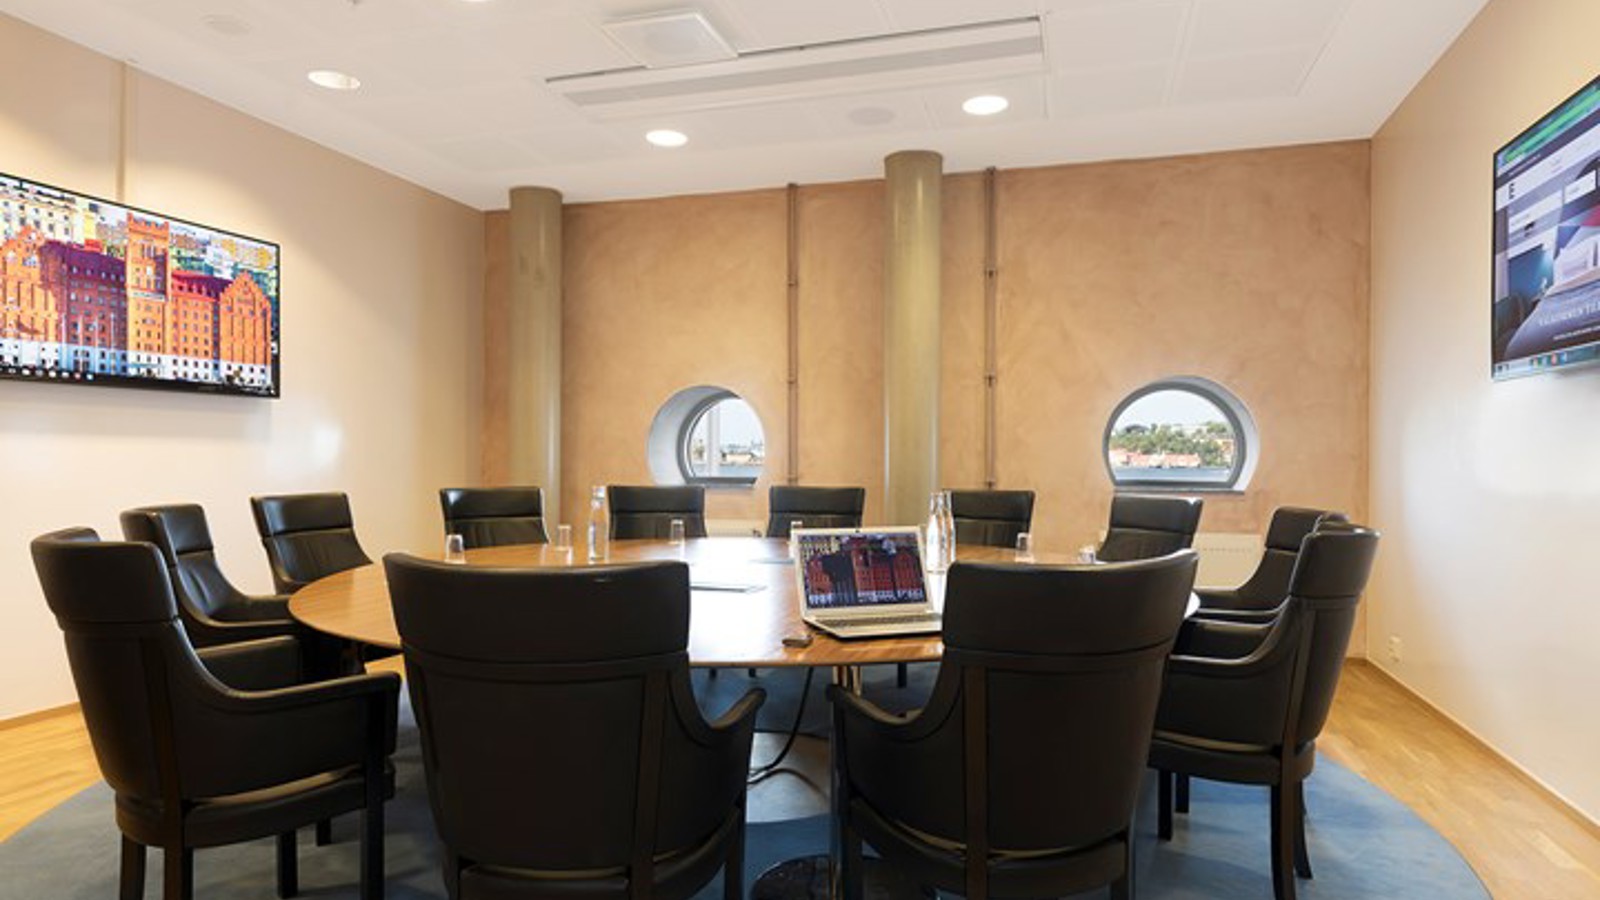 Conference room with round table, black armchairs and small round windows